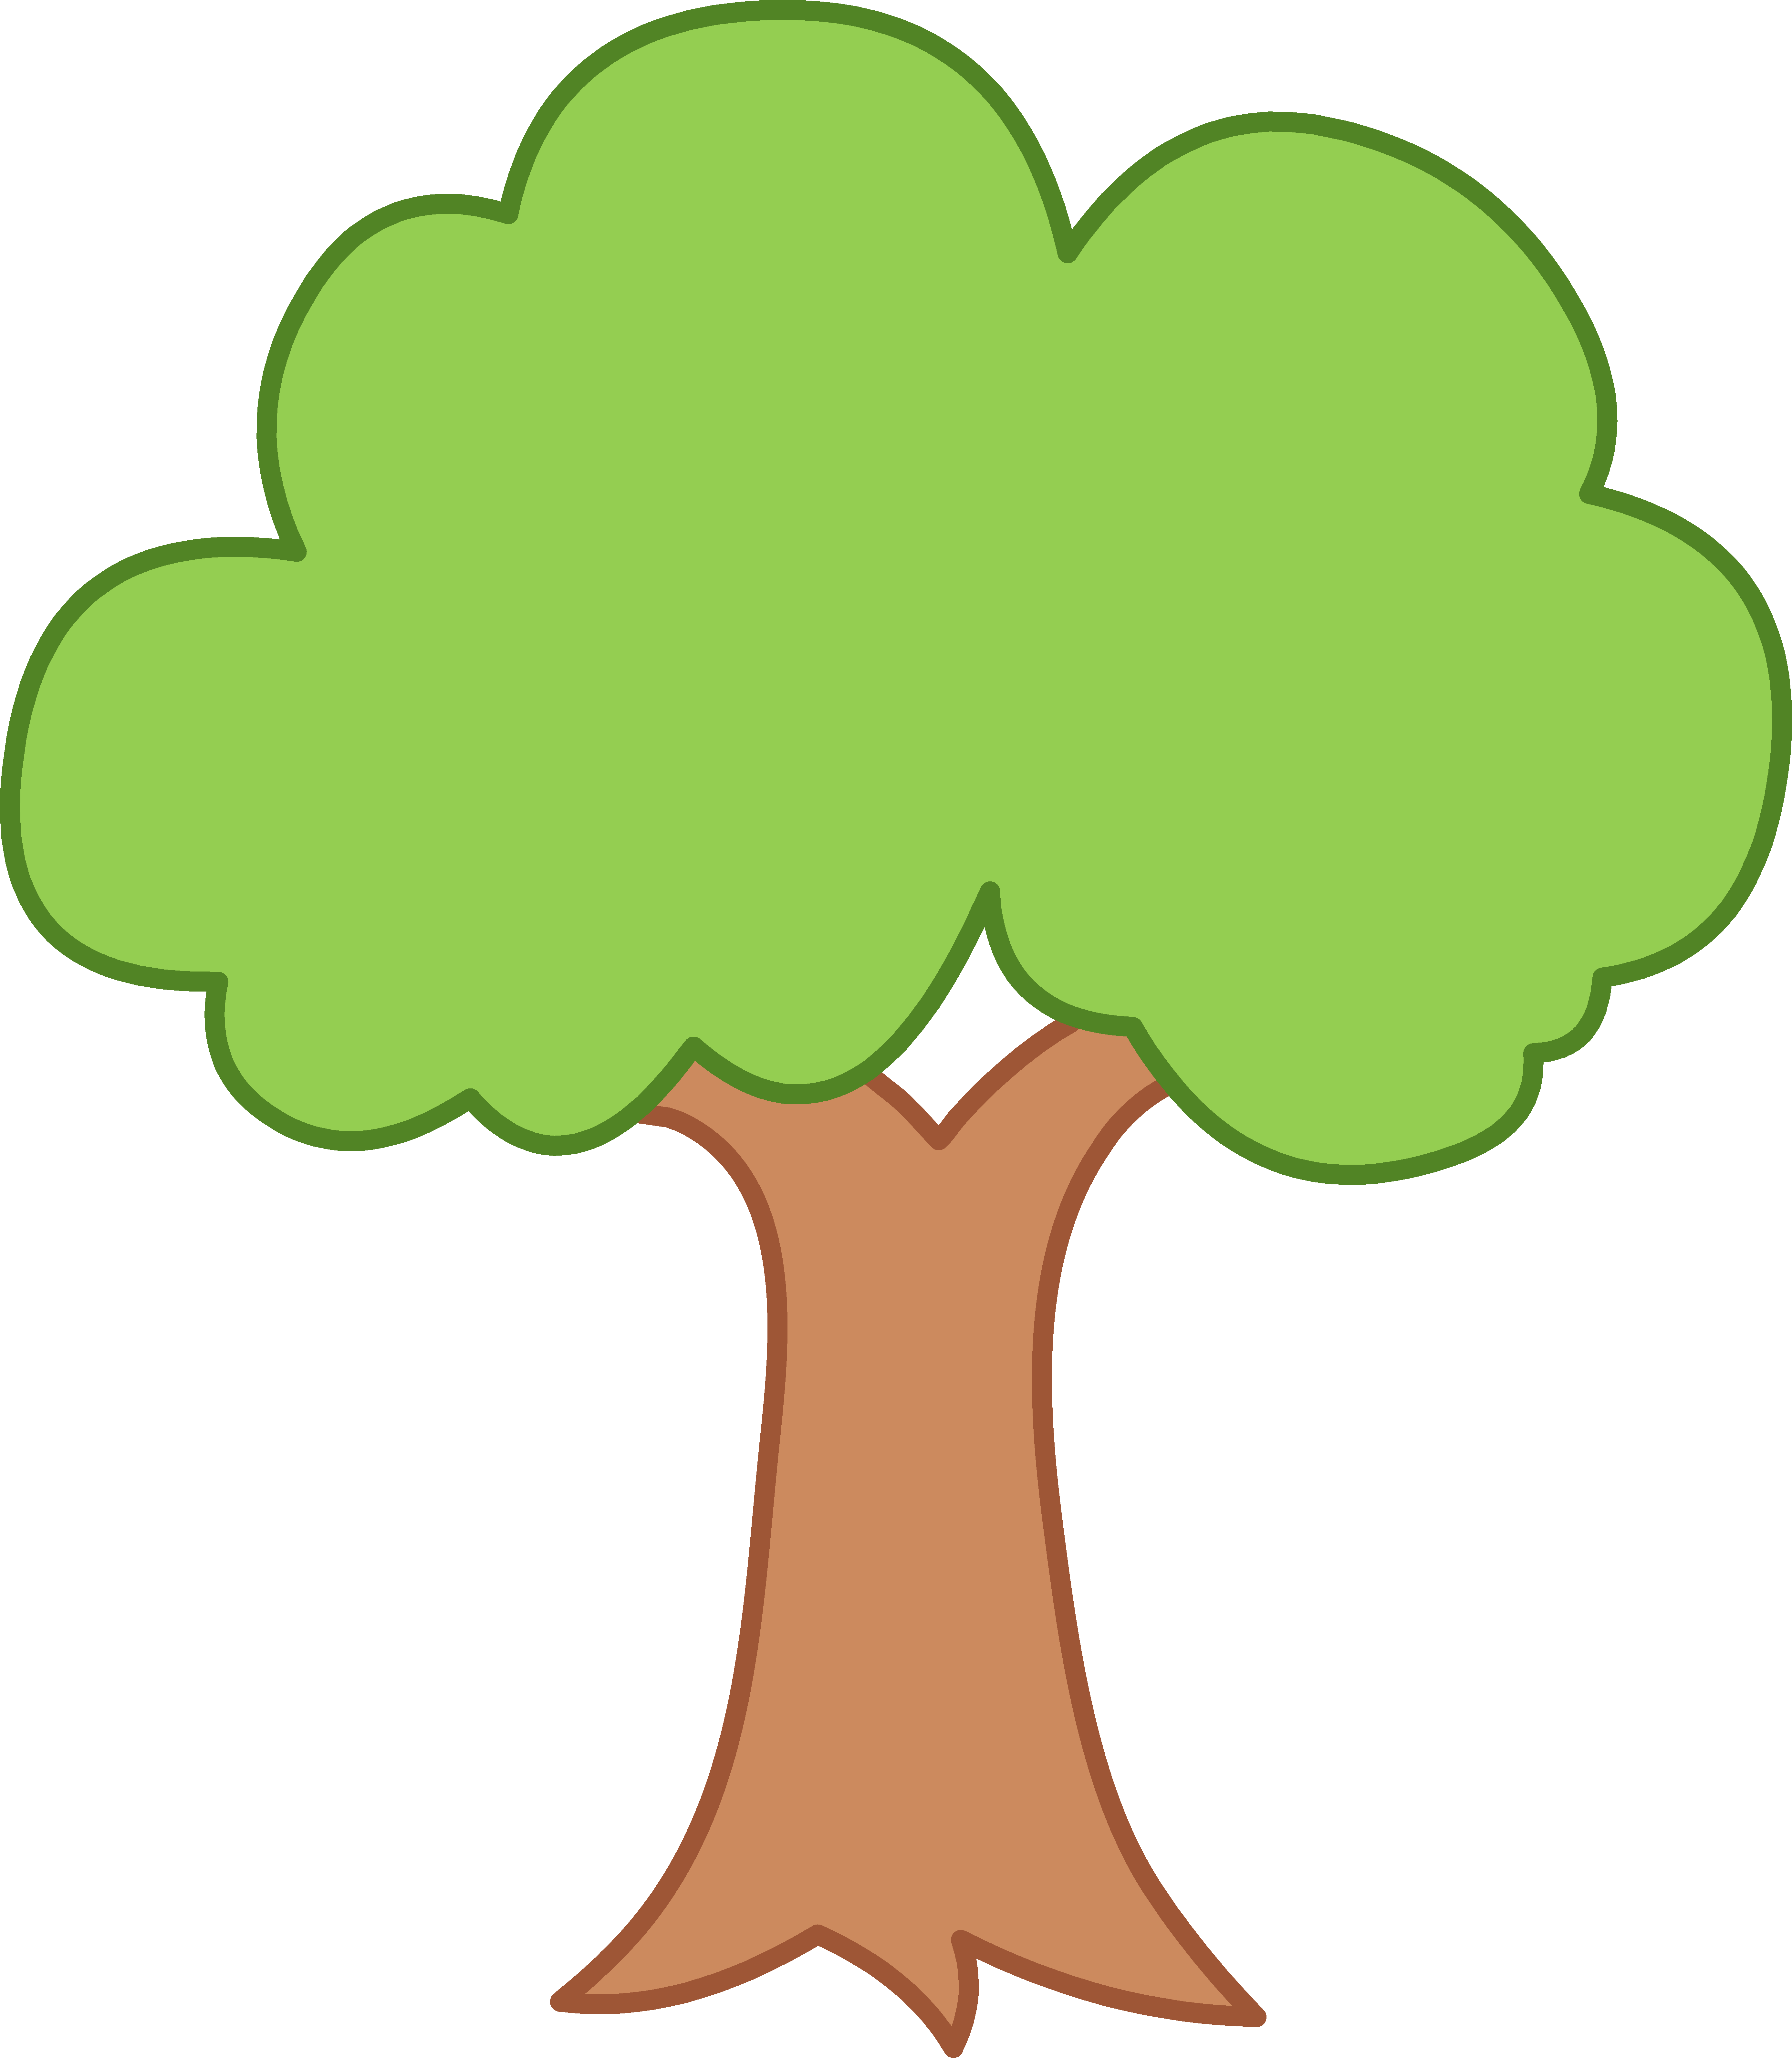 Tree Clip Art No Leaves | Clipart Panda - Free Clipart Images